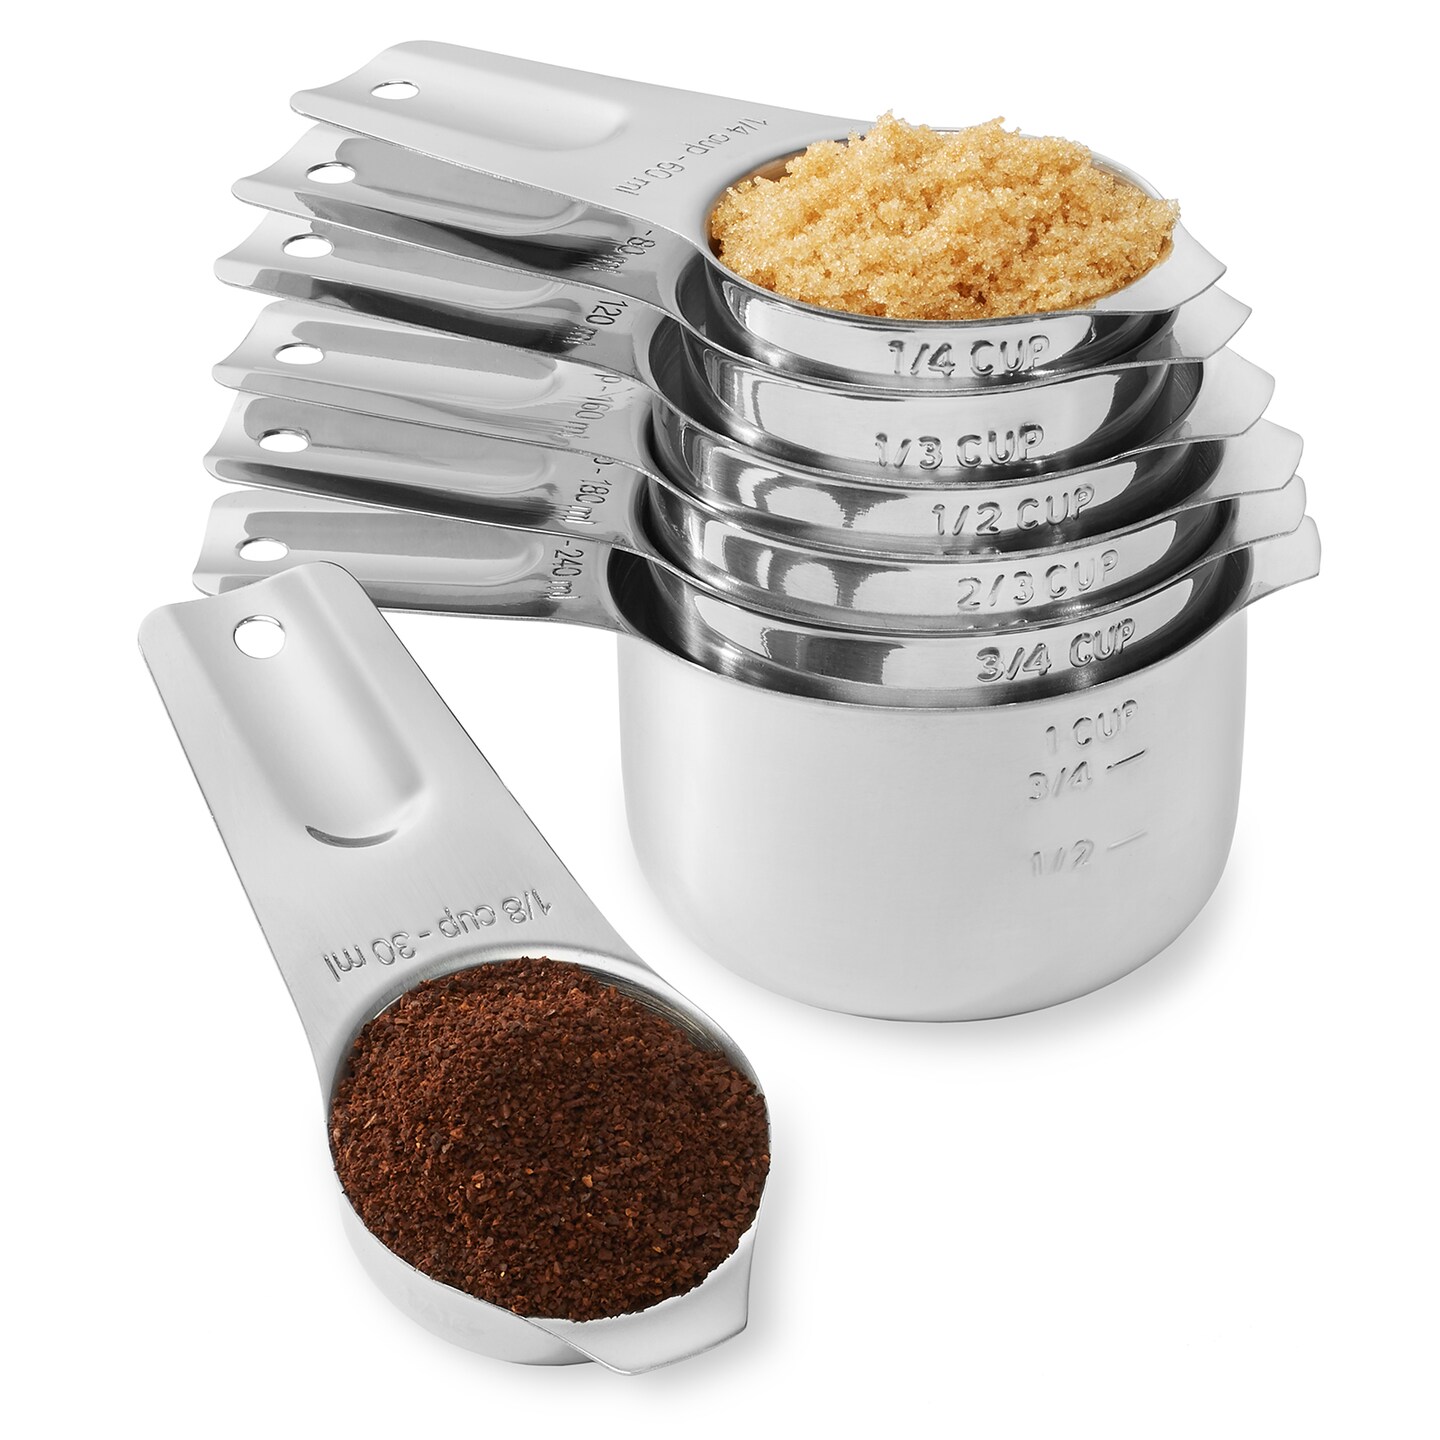 Last Confection 7pc Stainless Steel Measuring Cup Set - Includes 1/8 Cup Coffee Scoop - Measurements for Dry and Liquid Cooking &#x26; Baking Ingredients